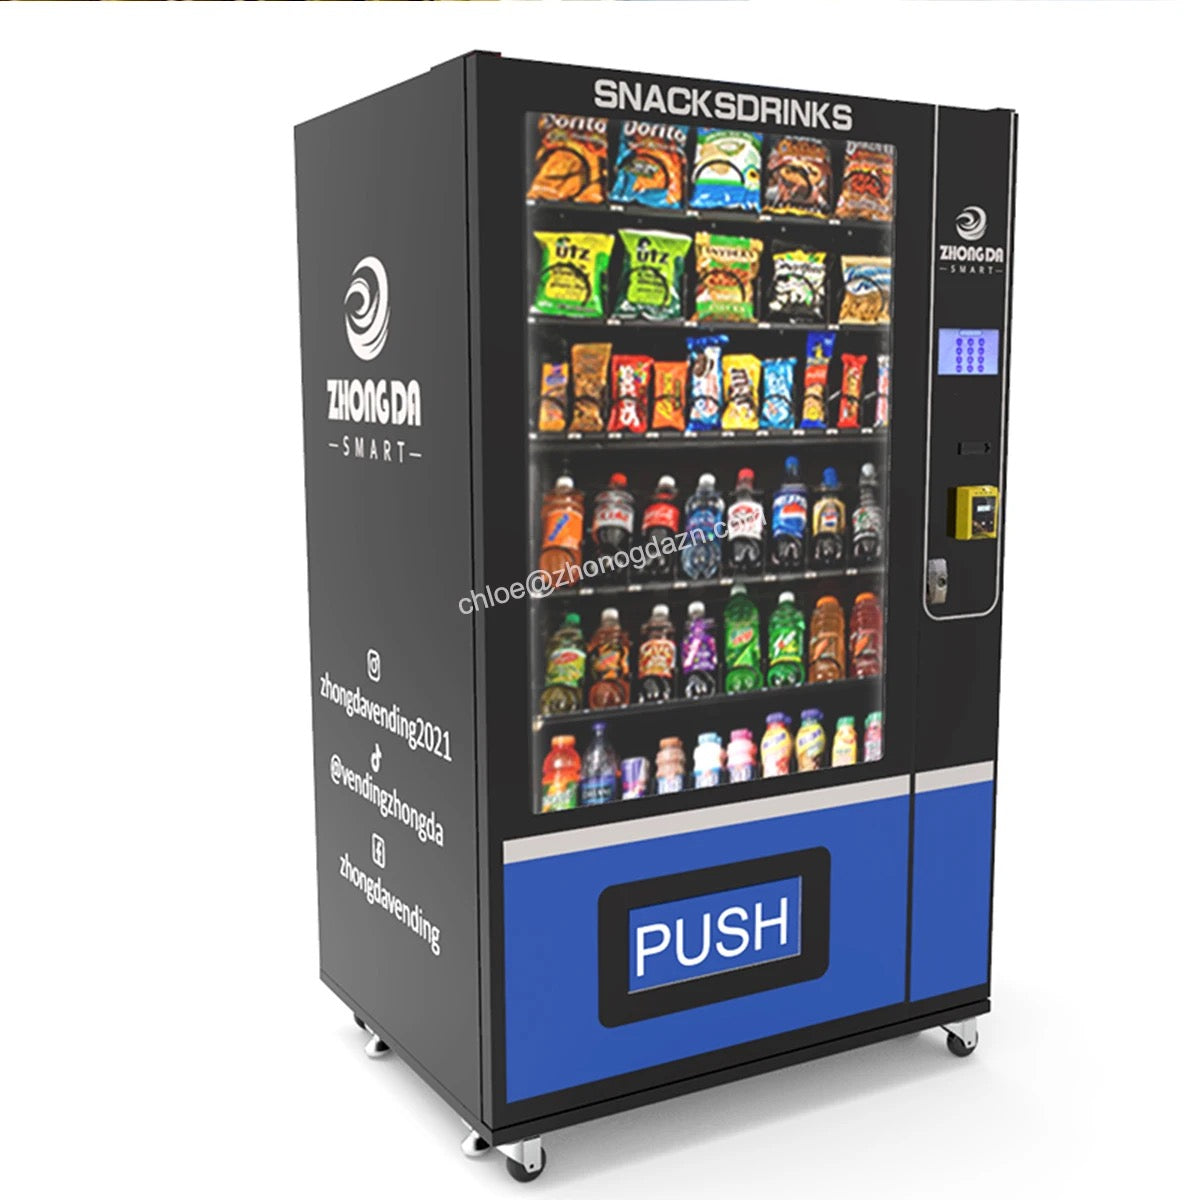 Type
Vending Machines
Dimension
1075*810*1900mm
After-sales Service
Provided
Video technical support, Free spare parts, Online support
Warranty
1 Year
Other attributes

Place of Origin
Guangdong, China
Brand Name
ZhongDa
Power
400W
Function
SDK
Name
Drink